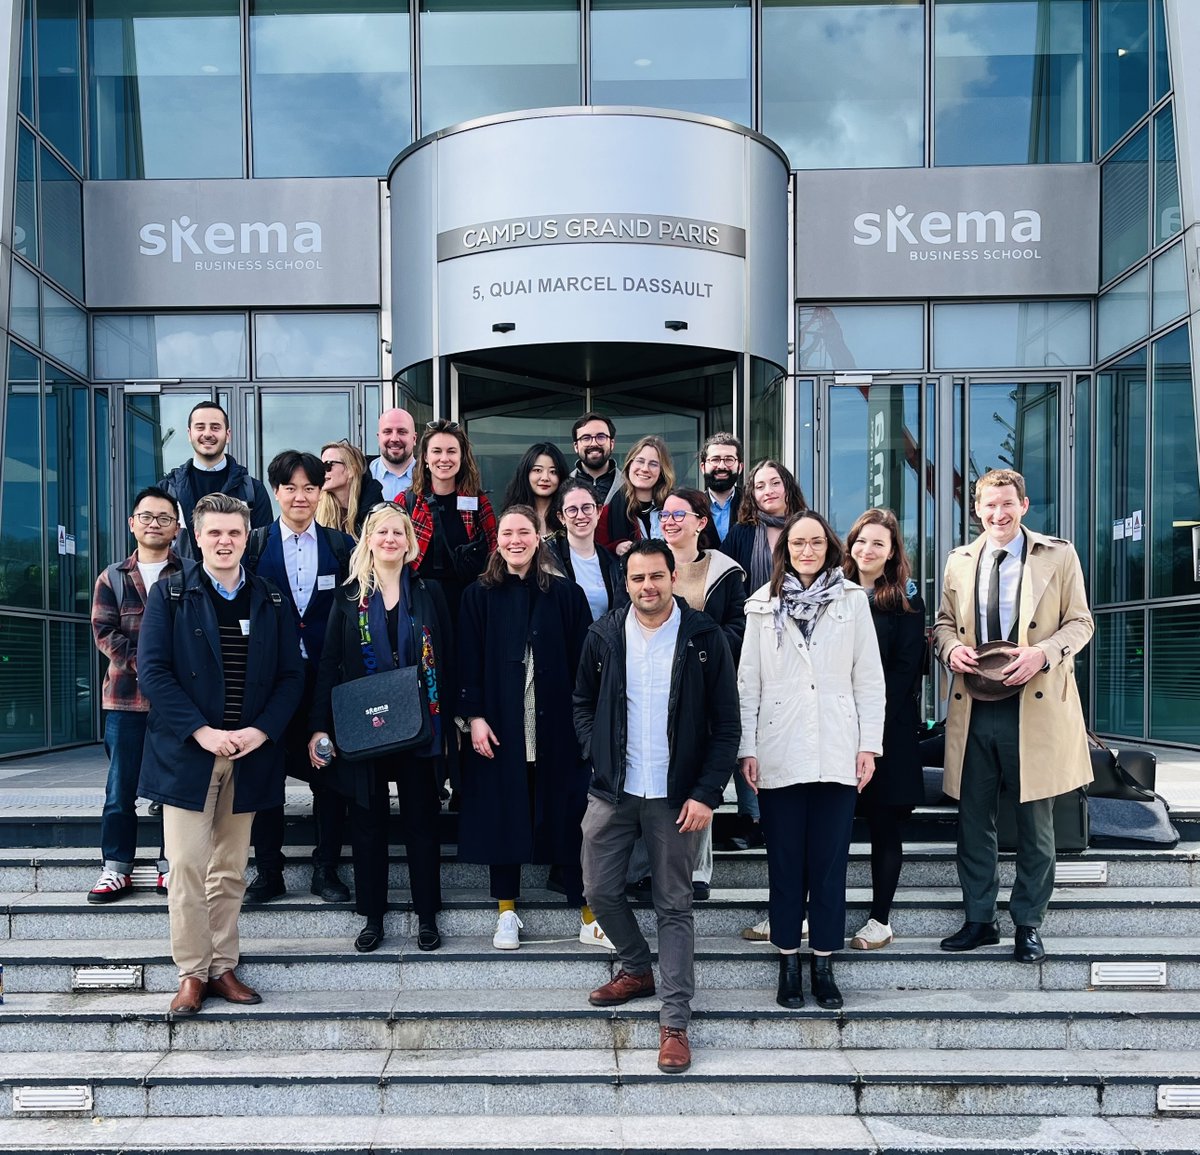 It was a pleasure taking part in the CHERN training school on 'Translating independent China research into actionable recommendations' last week in Paris hosted by @SKEMA_BS and @Inalco 🇪🇺🇨🇳!